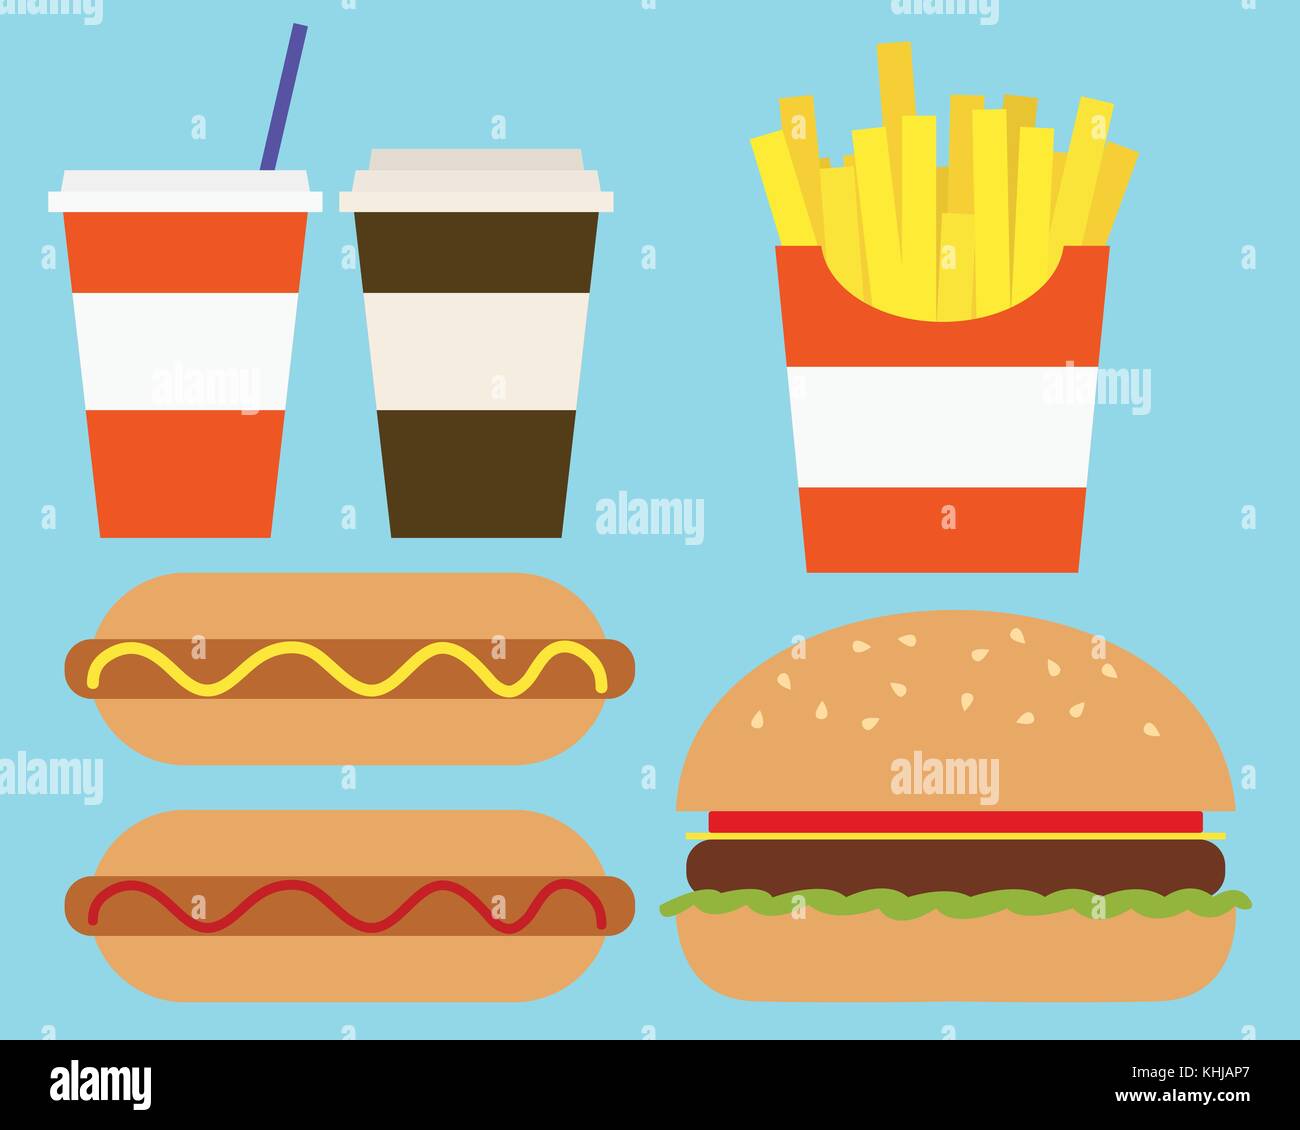 Flat design illustration of a fast food meal with food and drink, isolated on background - vector Stock Vector